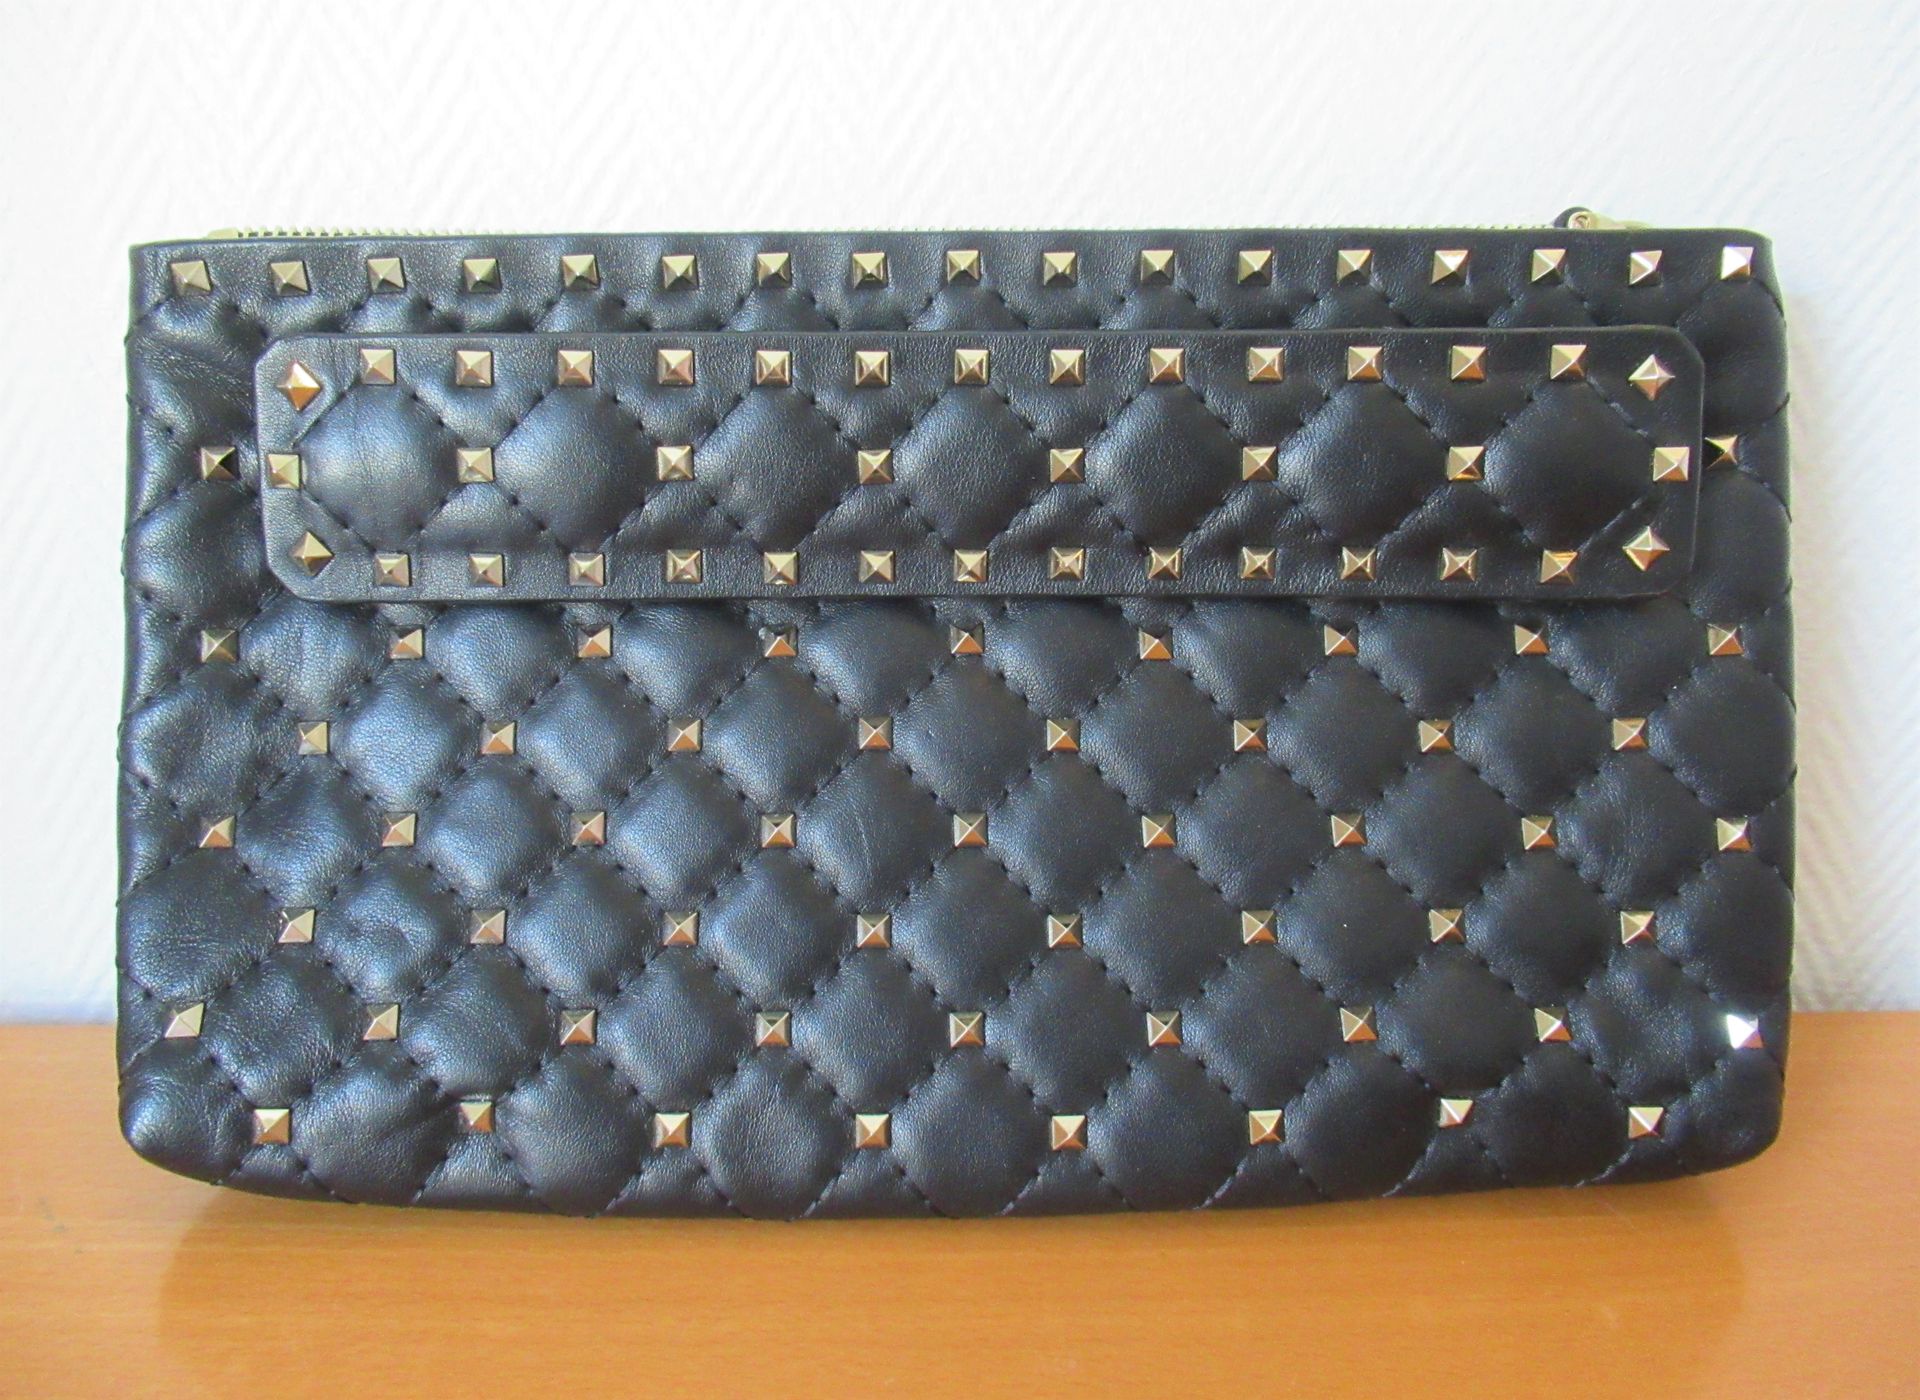 VALENTINO Black leather pouch with studs, zipper 27 x 15 cm Condition as new